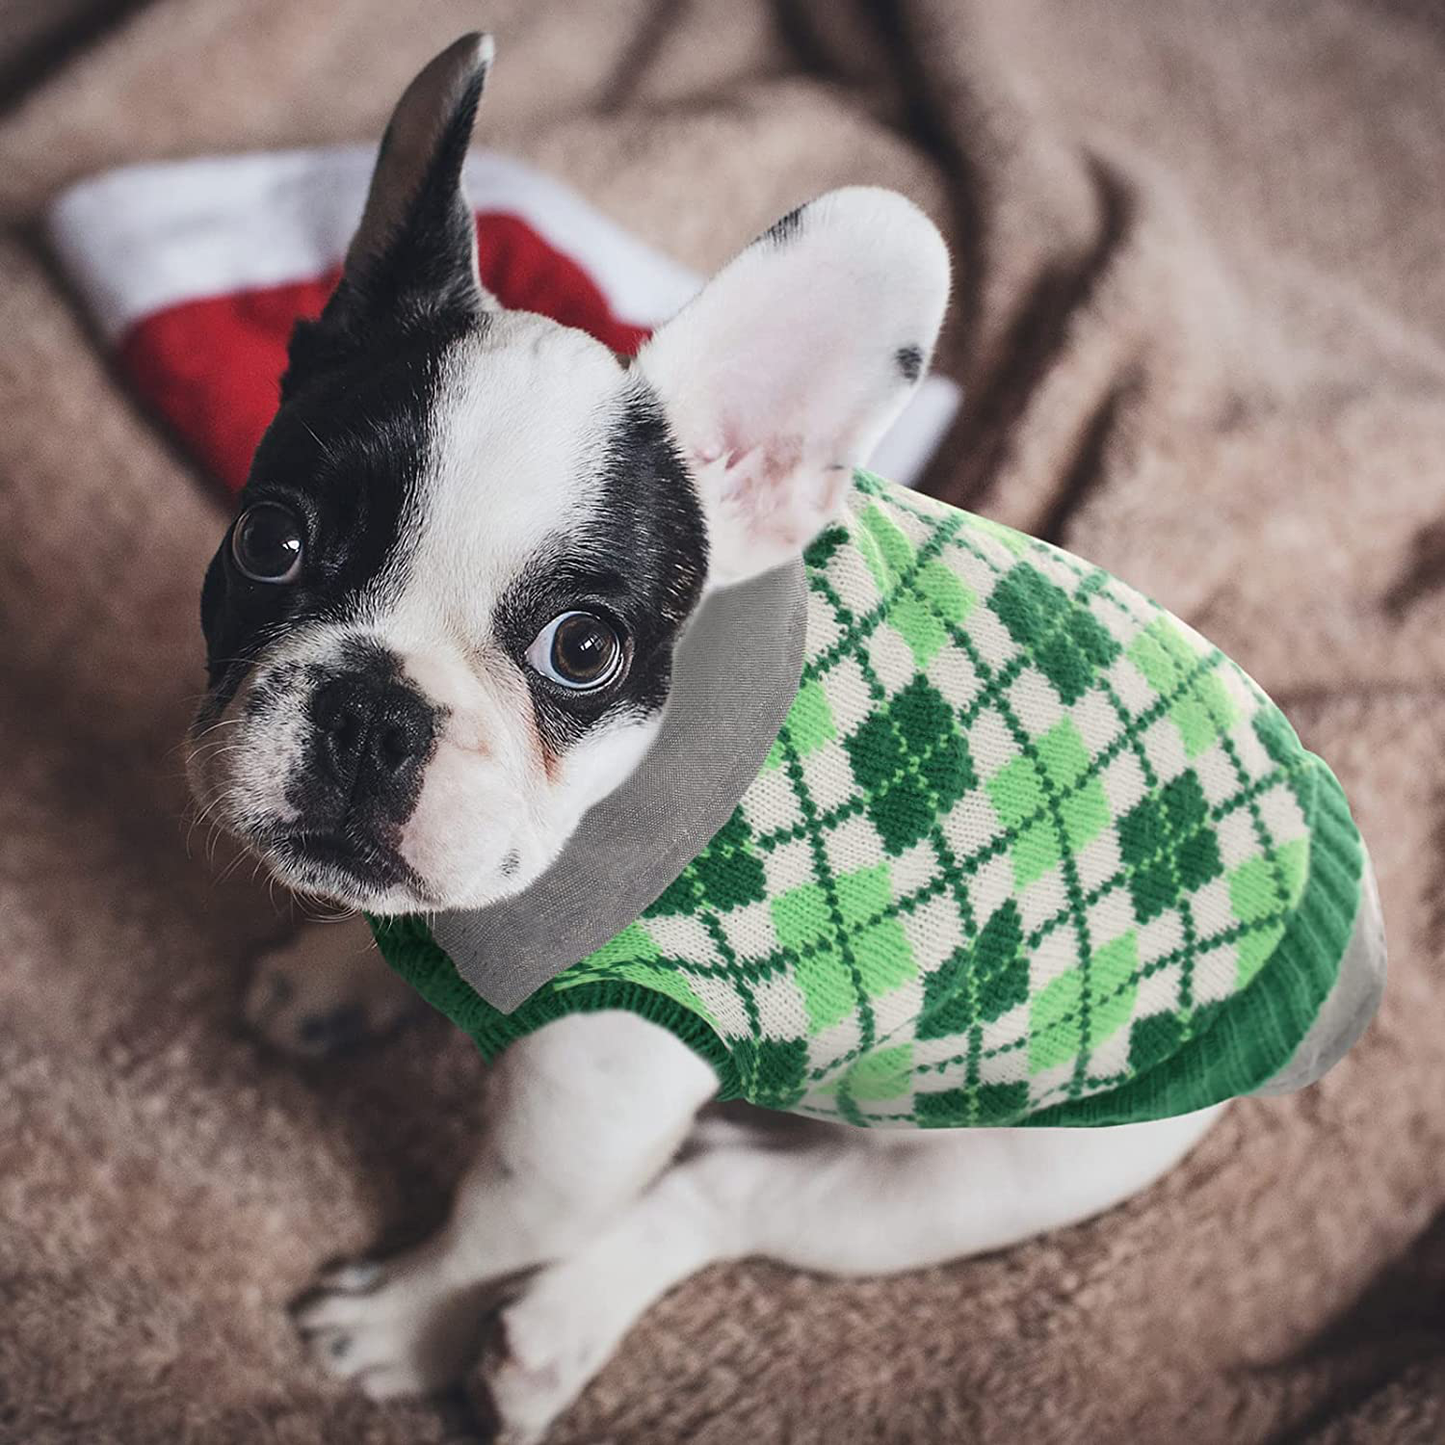 LETSQK Dog Sweater Dog Knitted Pet Clothes Classic Dog Winter Outfit with Plaid Argyle Patterns Warm Dog Sweatshirt with Polo Collar for Small Medium Puppies Dogs Cats